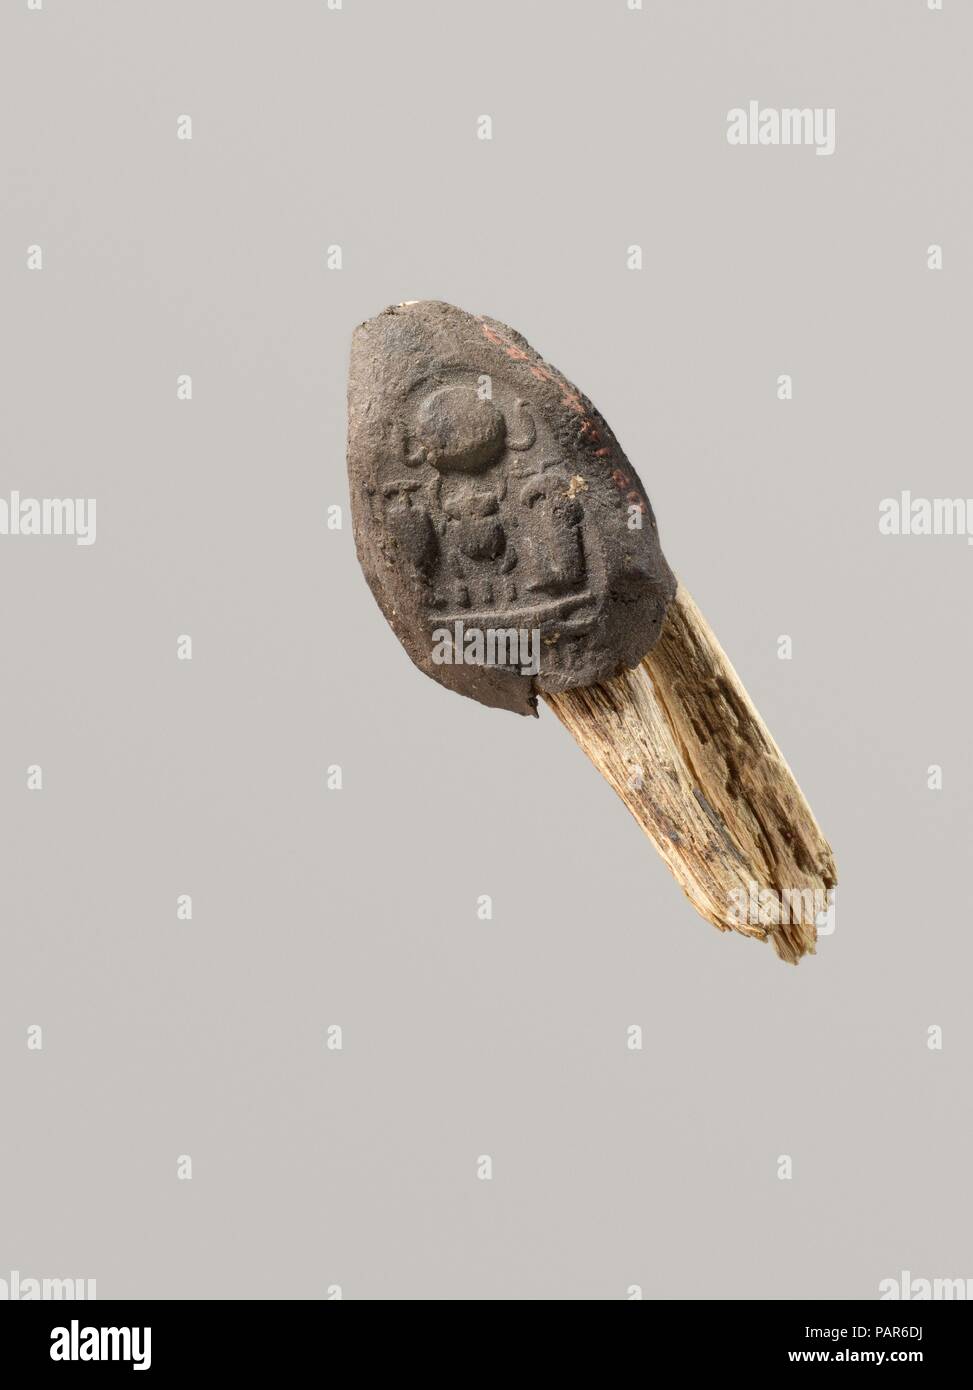 Seal Impression Attatched to a Fiber Tie from Tutankhamun's Embalming Cache. Dimensions: Seal and tie: L. 4.2 cm (1 5/8 in.)  Seal: L. 2.5 cm (1 in.); W. 1.8 cm (11/16 in.). Dynasty: Dynasty 18. Reign: reign of Tutankhamun. Date: ca. 1336-1327 B.C..  This mud sealing is still attached to a piece of the papyrus tie that was used to secure a container. The impression preserves the throne name of Tutankhamun, Nebkheperure, and the epithets 'beloved of Khnum' and 'manifold of praises.'   For a similar impression, see 09.184.263. Museum: Metropolitan Museum of Art, New York, USA. Stock Photo